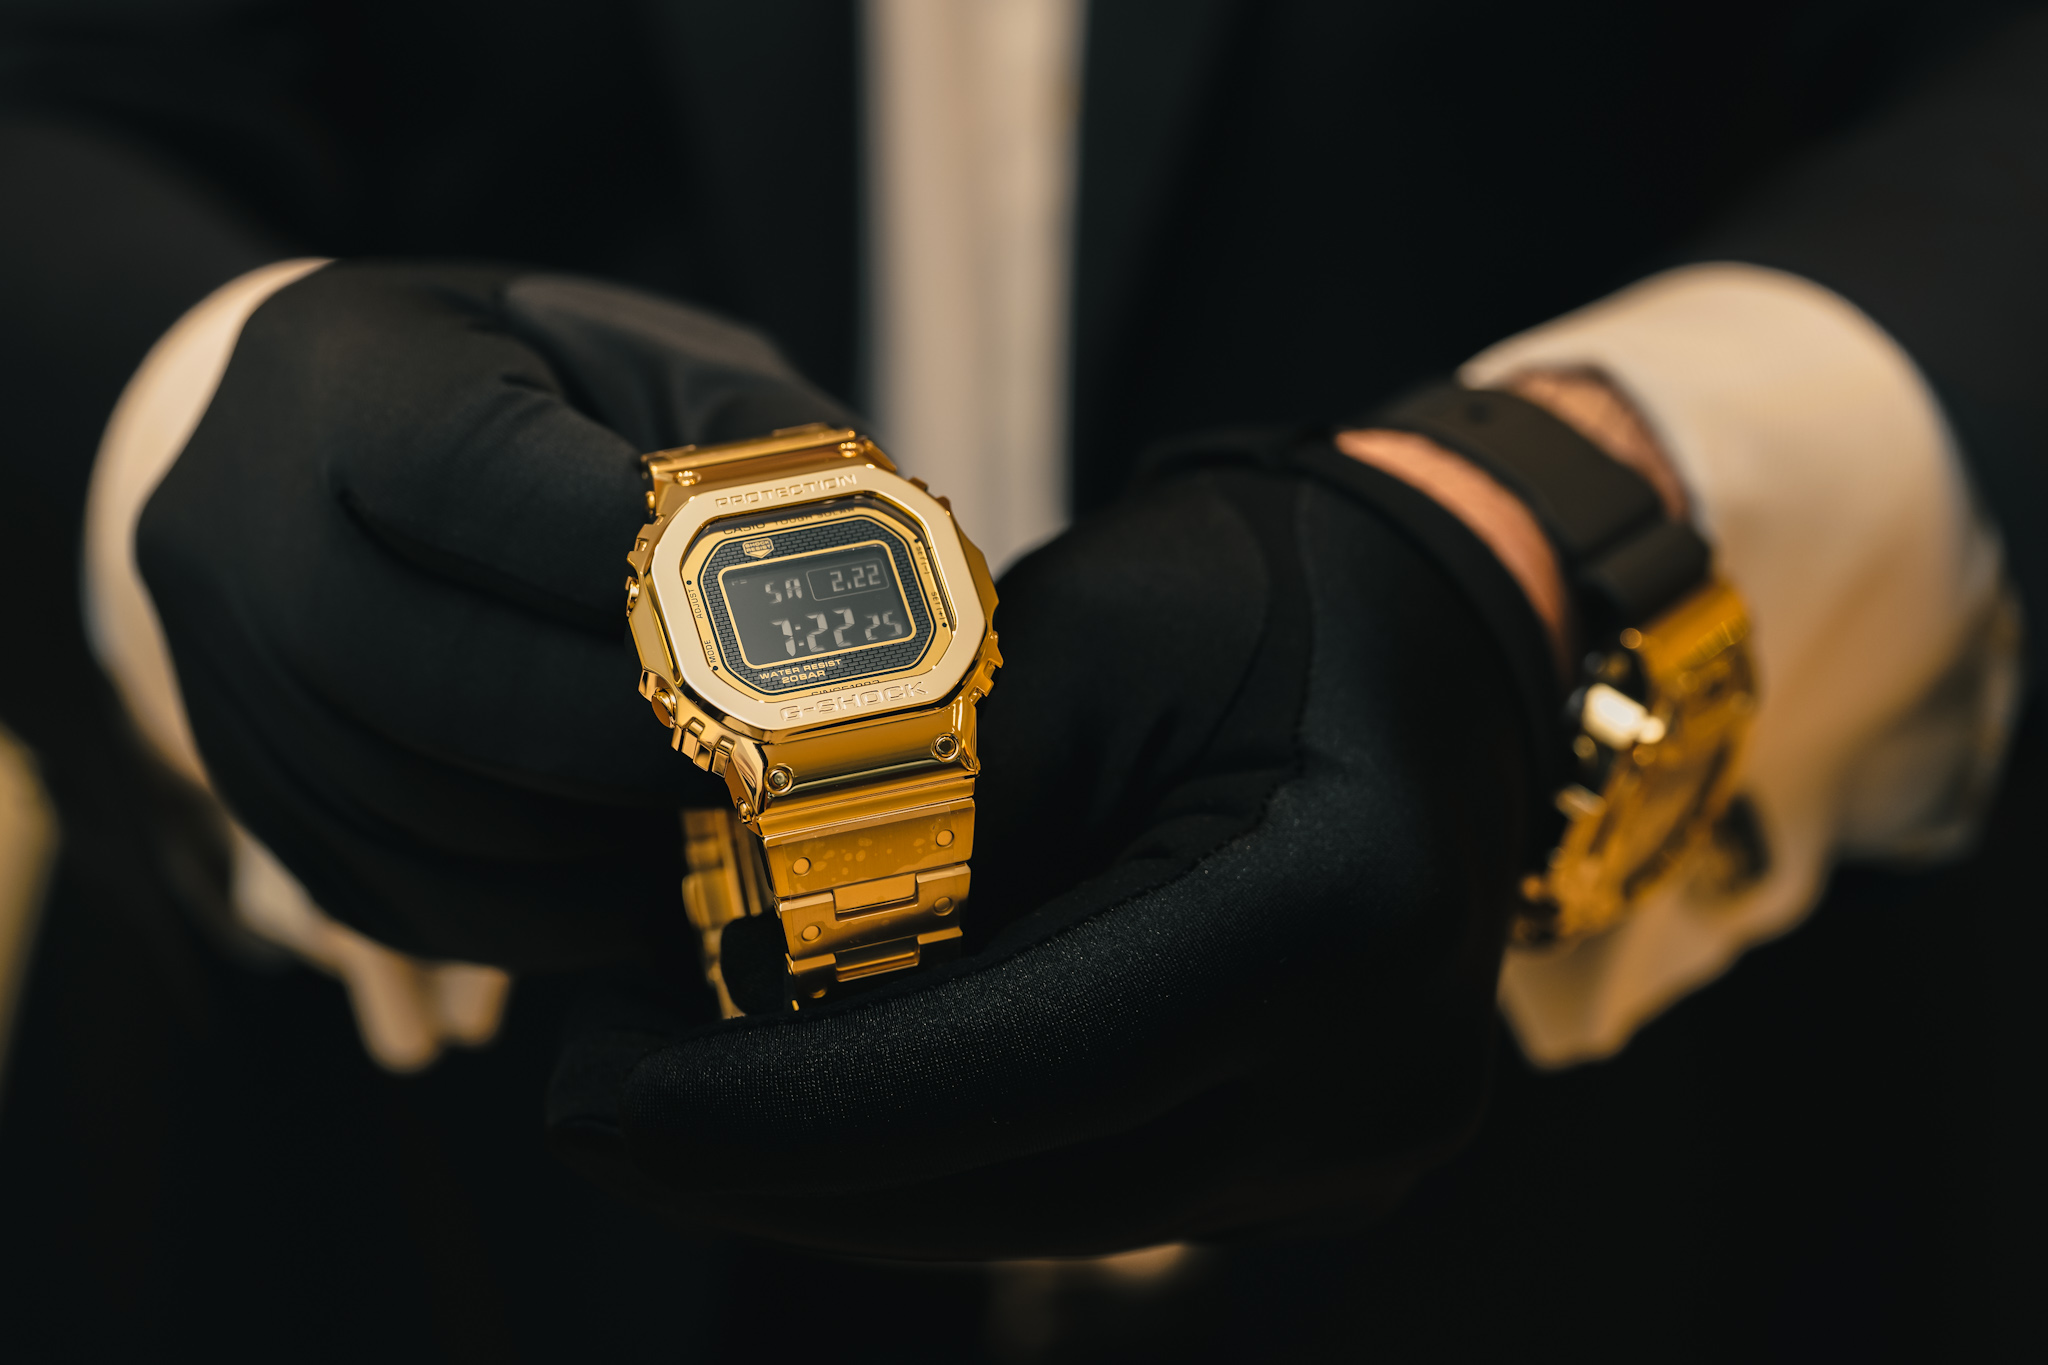 Unboxing the Solid Gold G-Shock G-D5000-9JR 'Dream Project' at